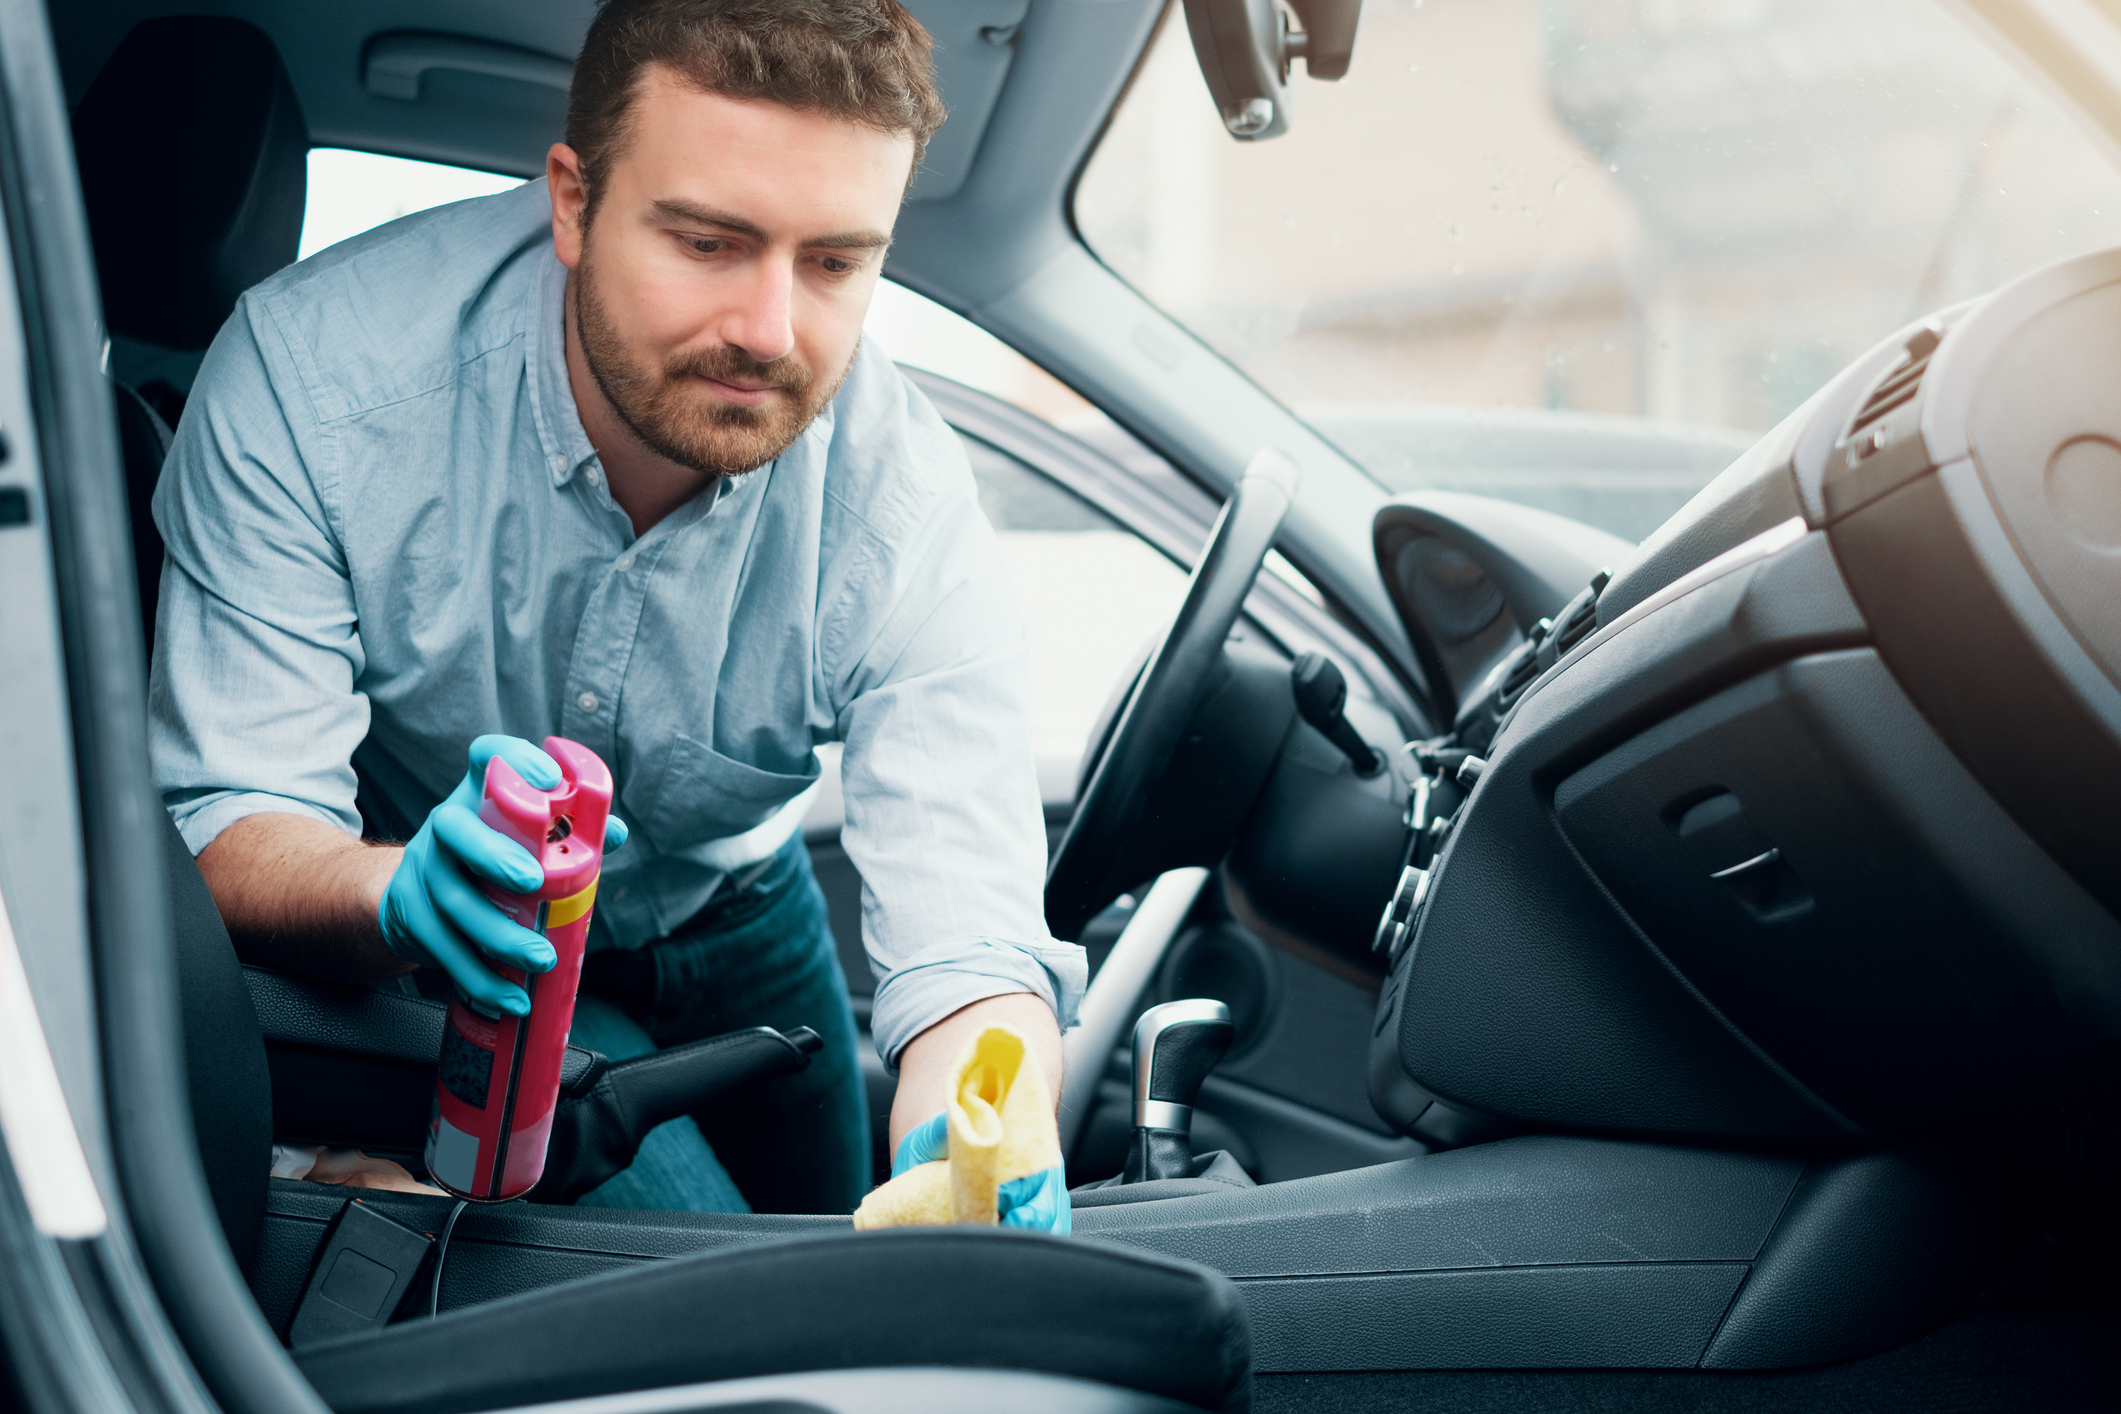 Riding Out the Coronavirus: How to Sanitise Your Car and Keep Your Family Safe